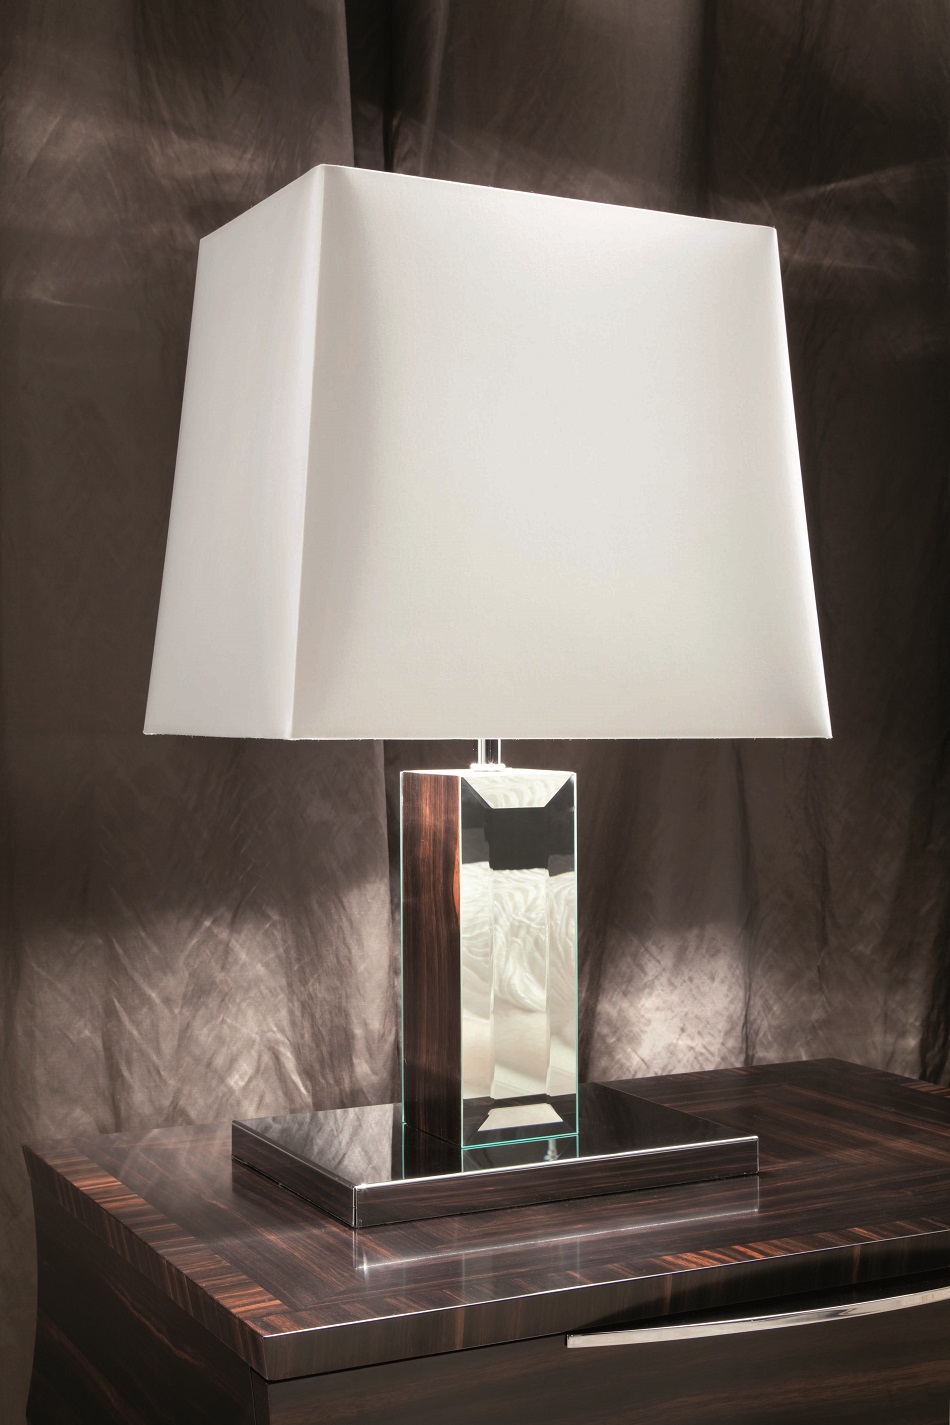 Night table small lamp